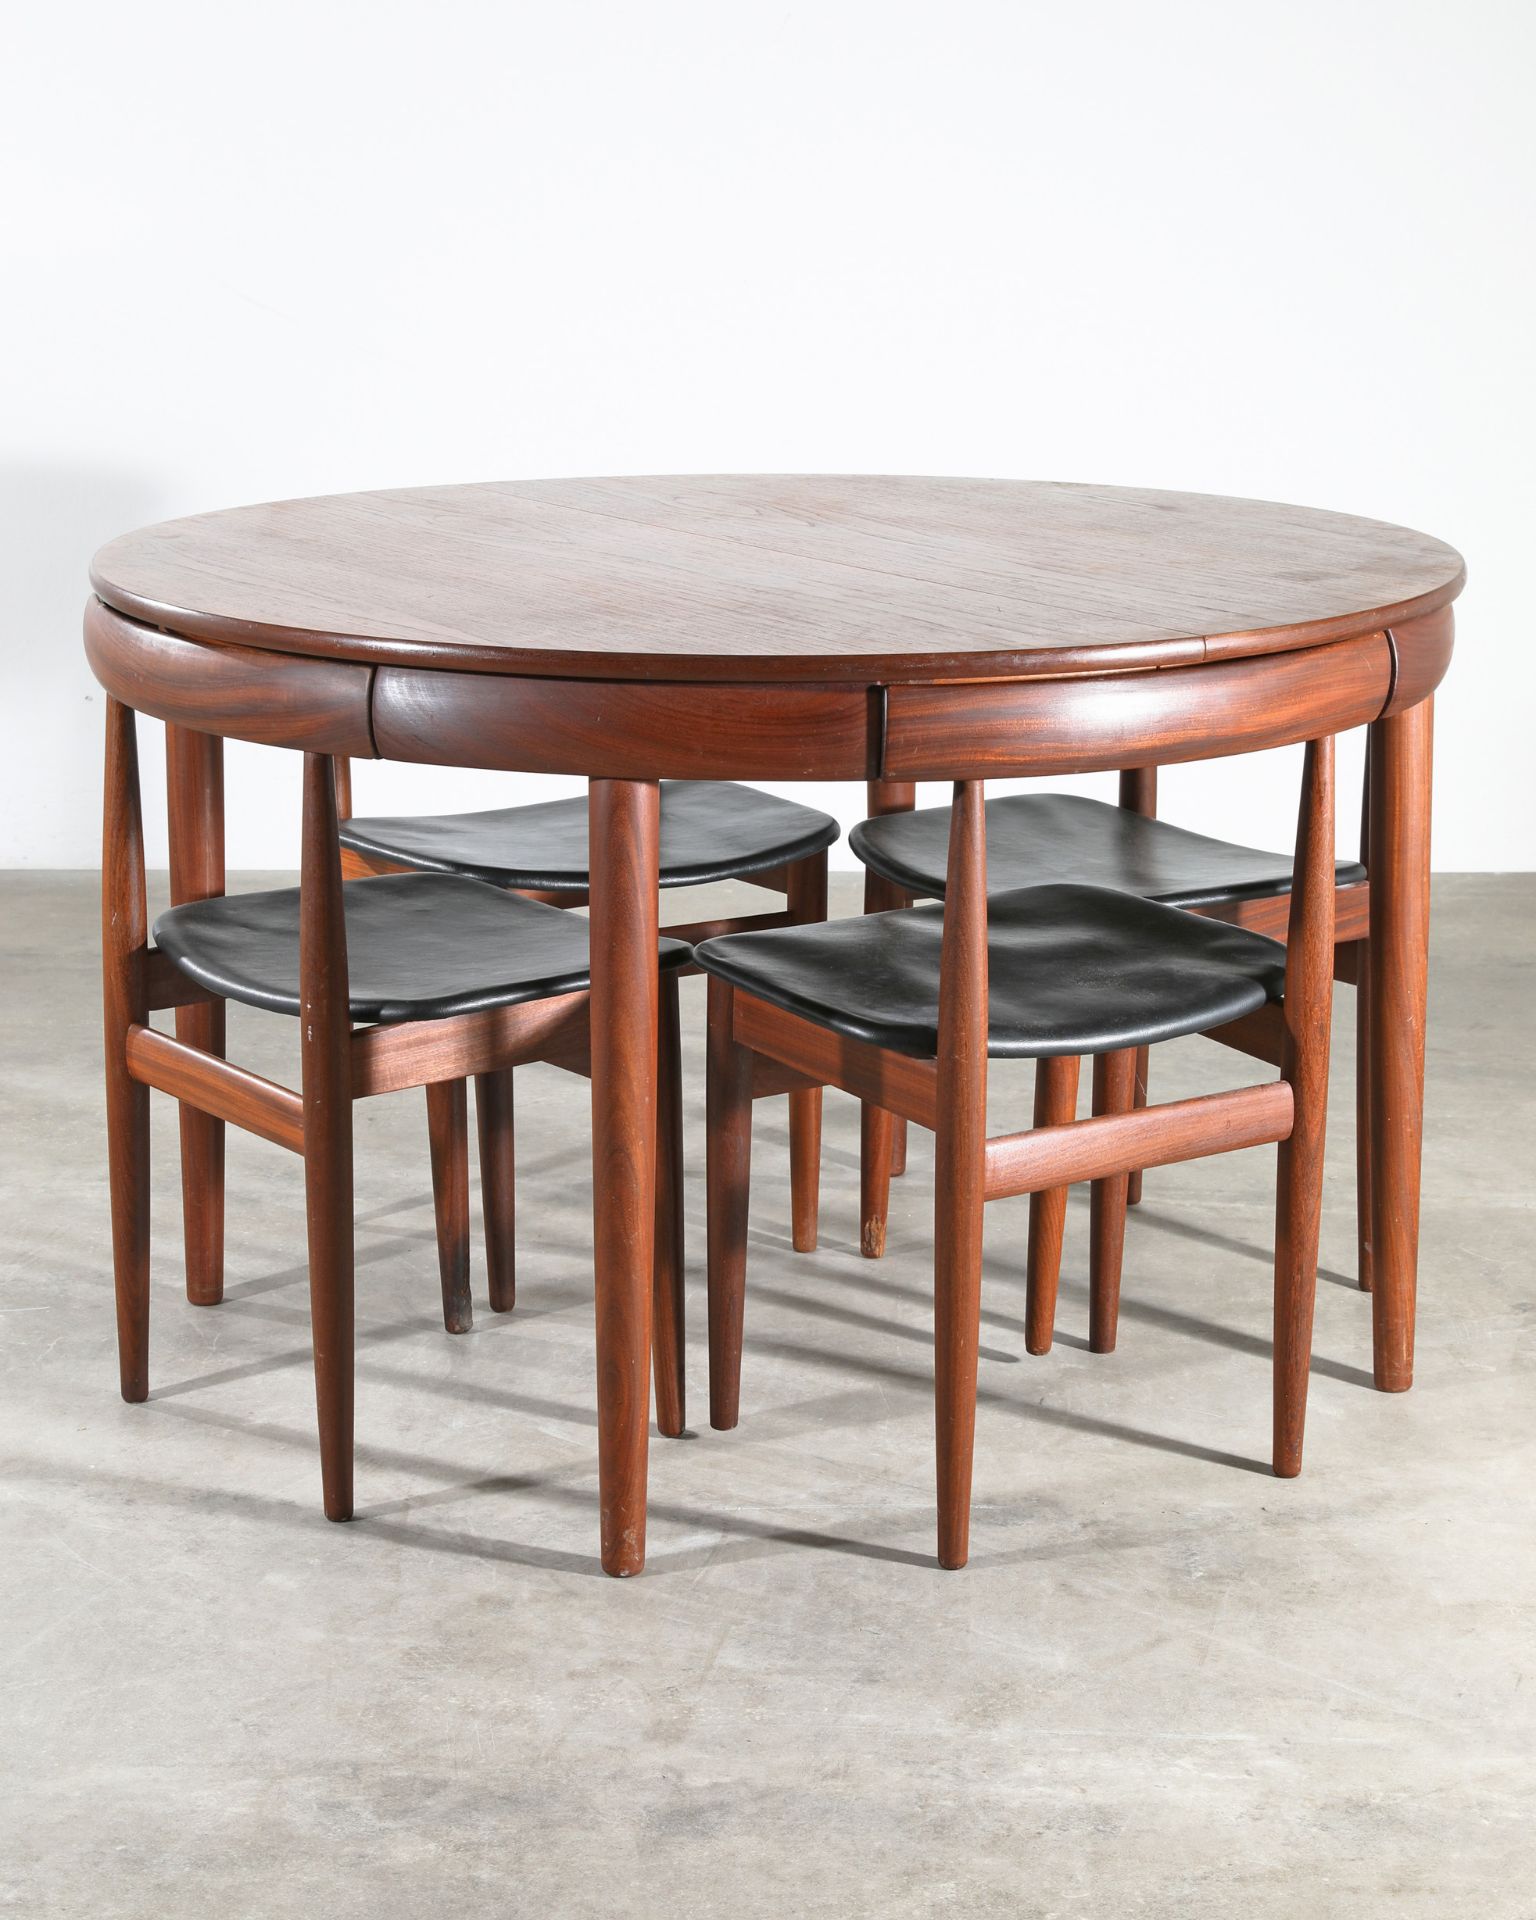 Hans Olsen, Frem Røjle, Dining Set 630/31 Table and 5 Chairs